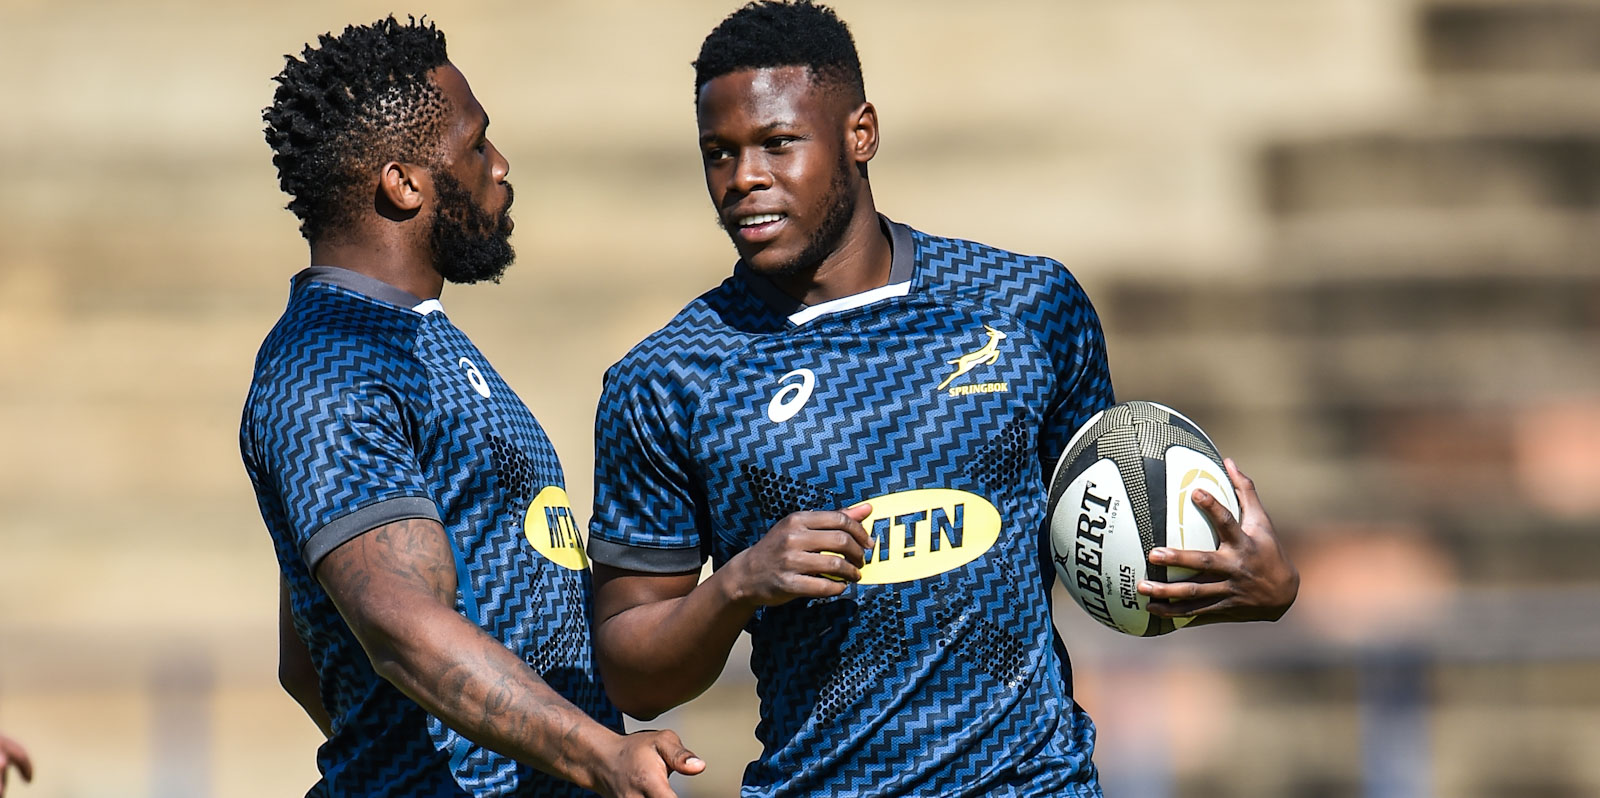 Springbok captain Siya Kolisi shares some tips with the uncalled Aphelele Fassi at a training session.